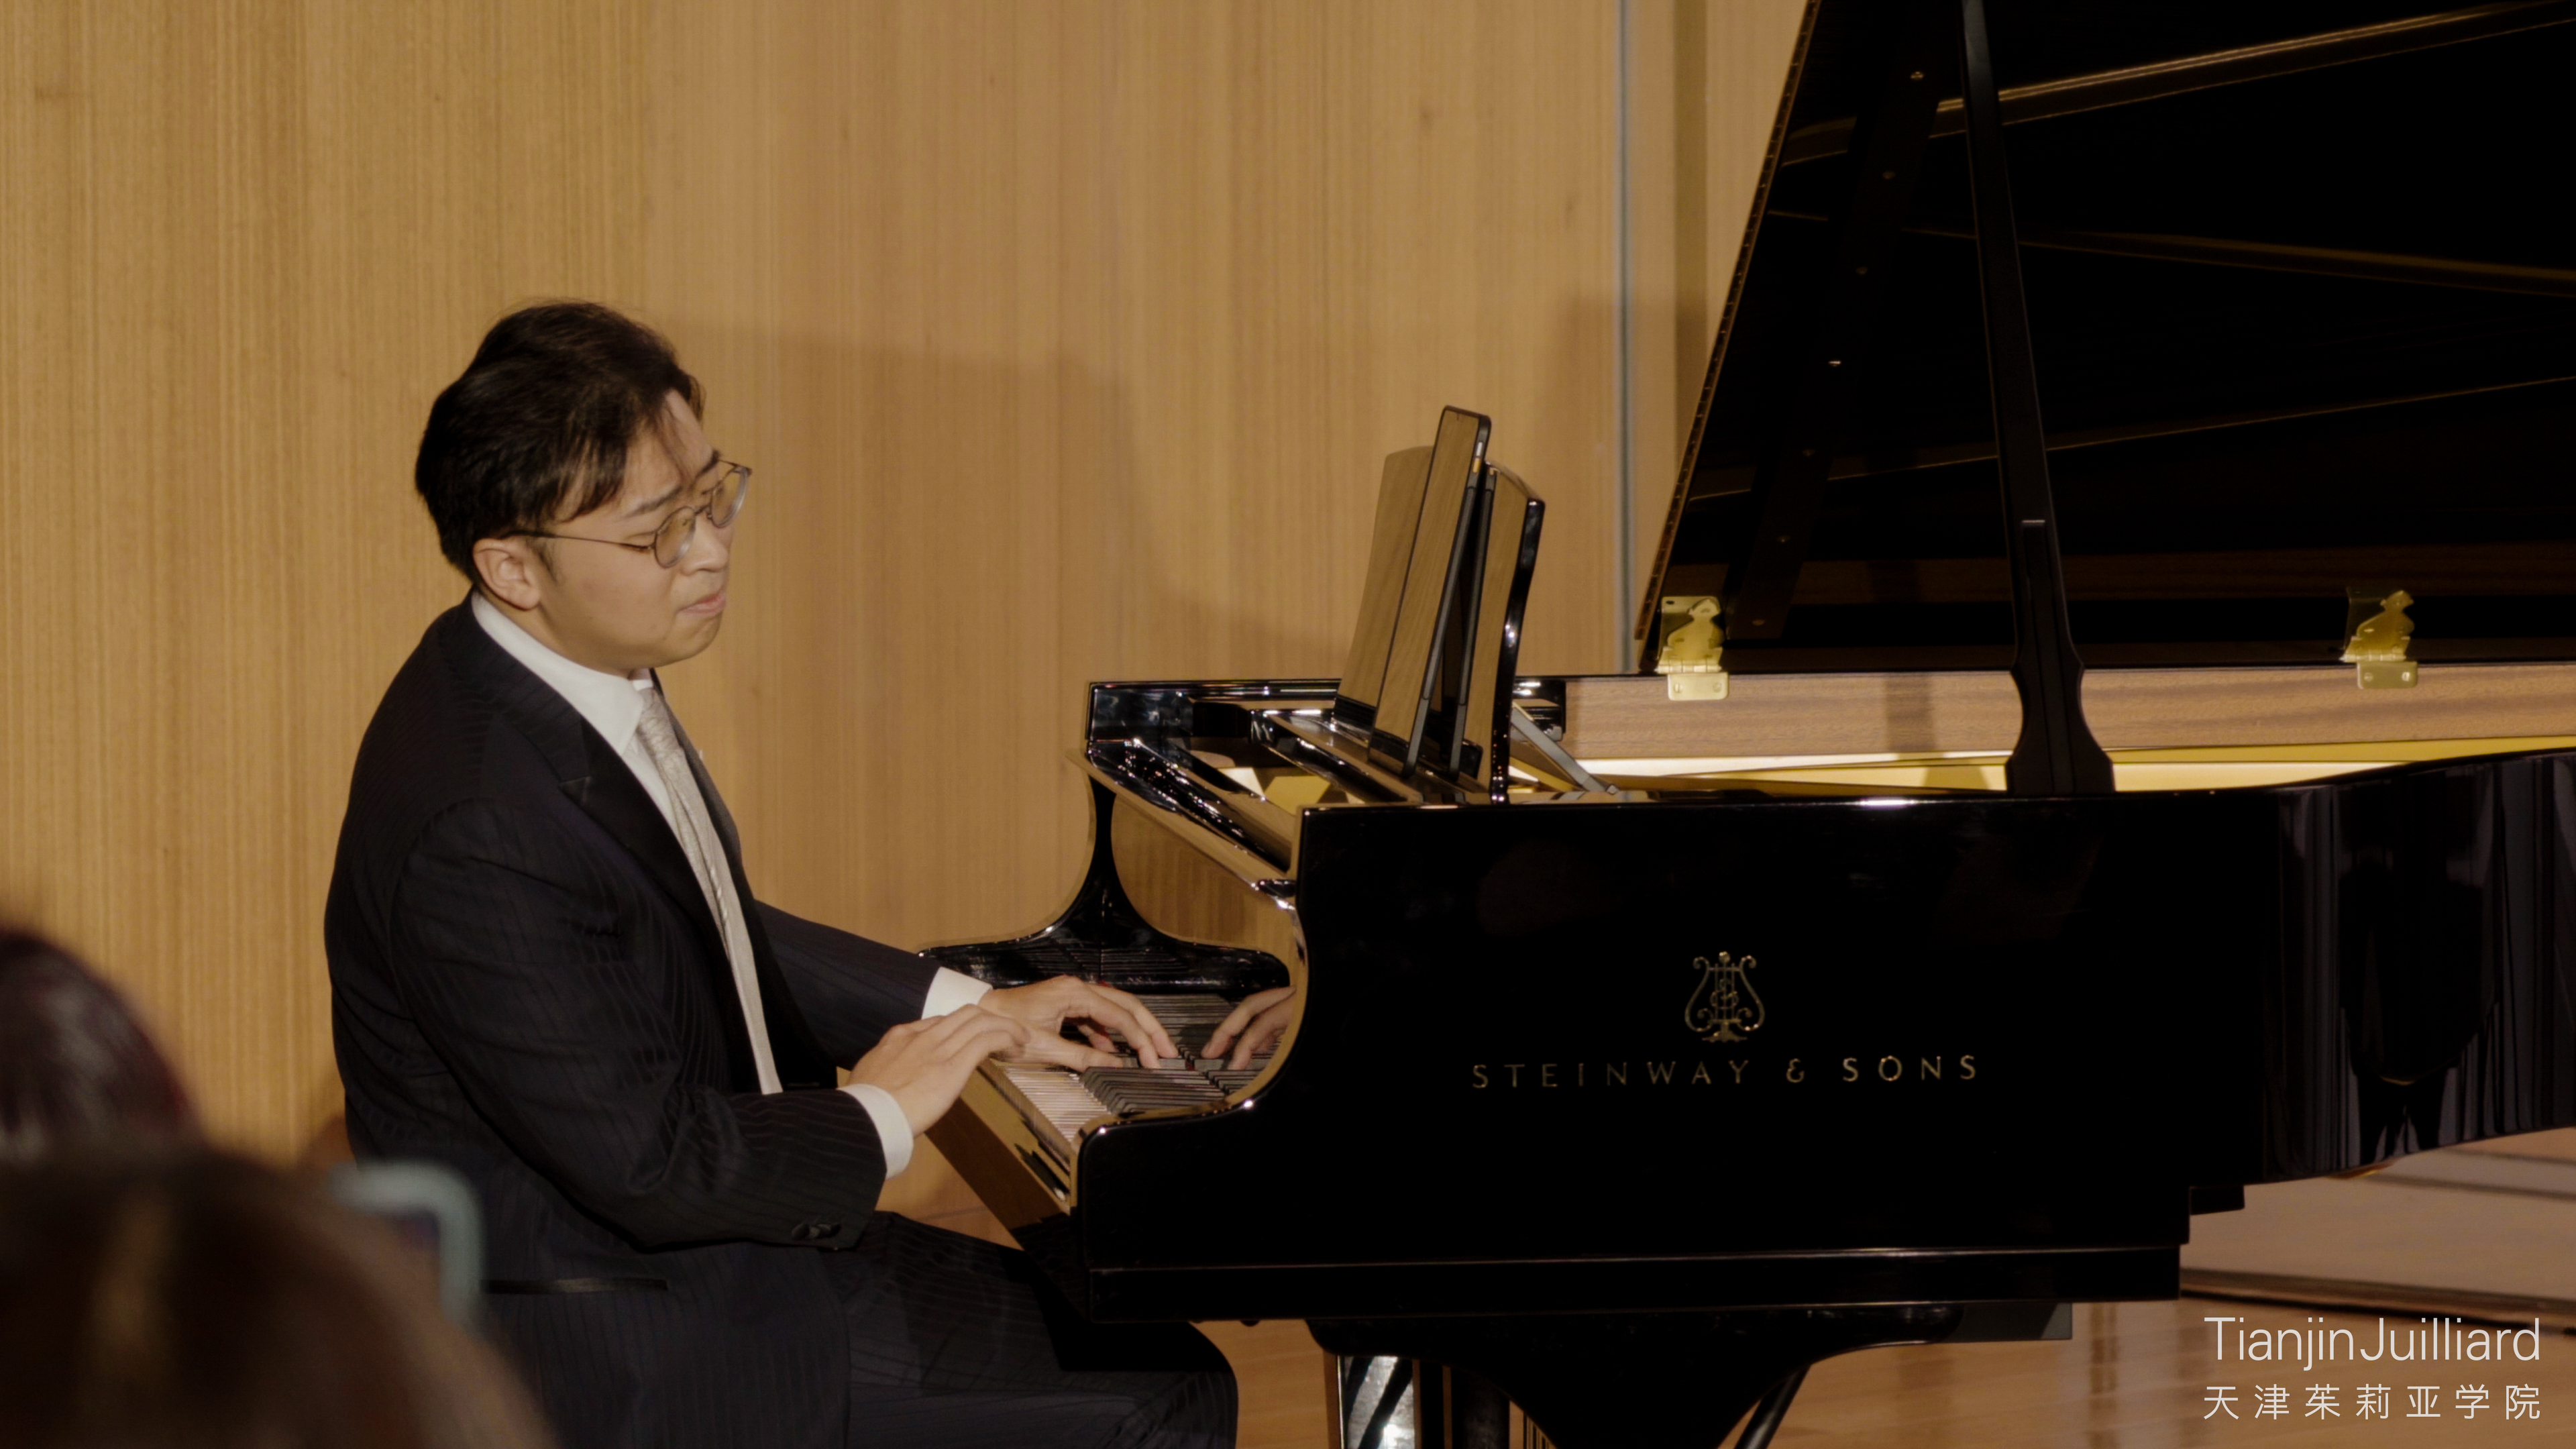 Using a Steinway Spirio player piano, faculty member Alvin Zhu performed a piano duo with himself as part of the ceremony.